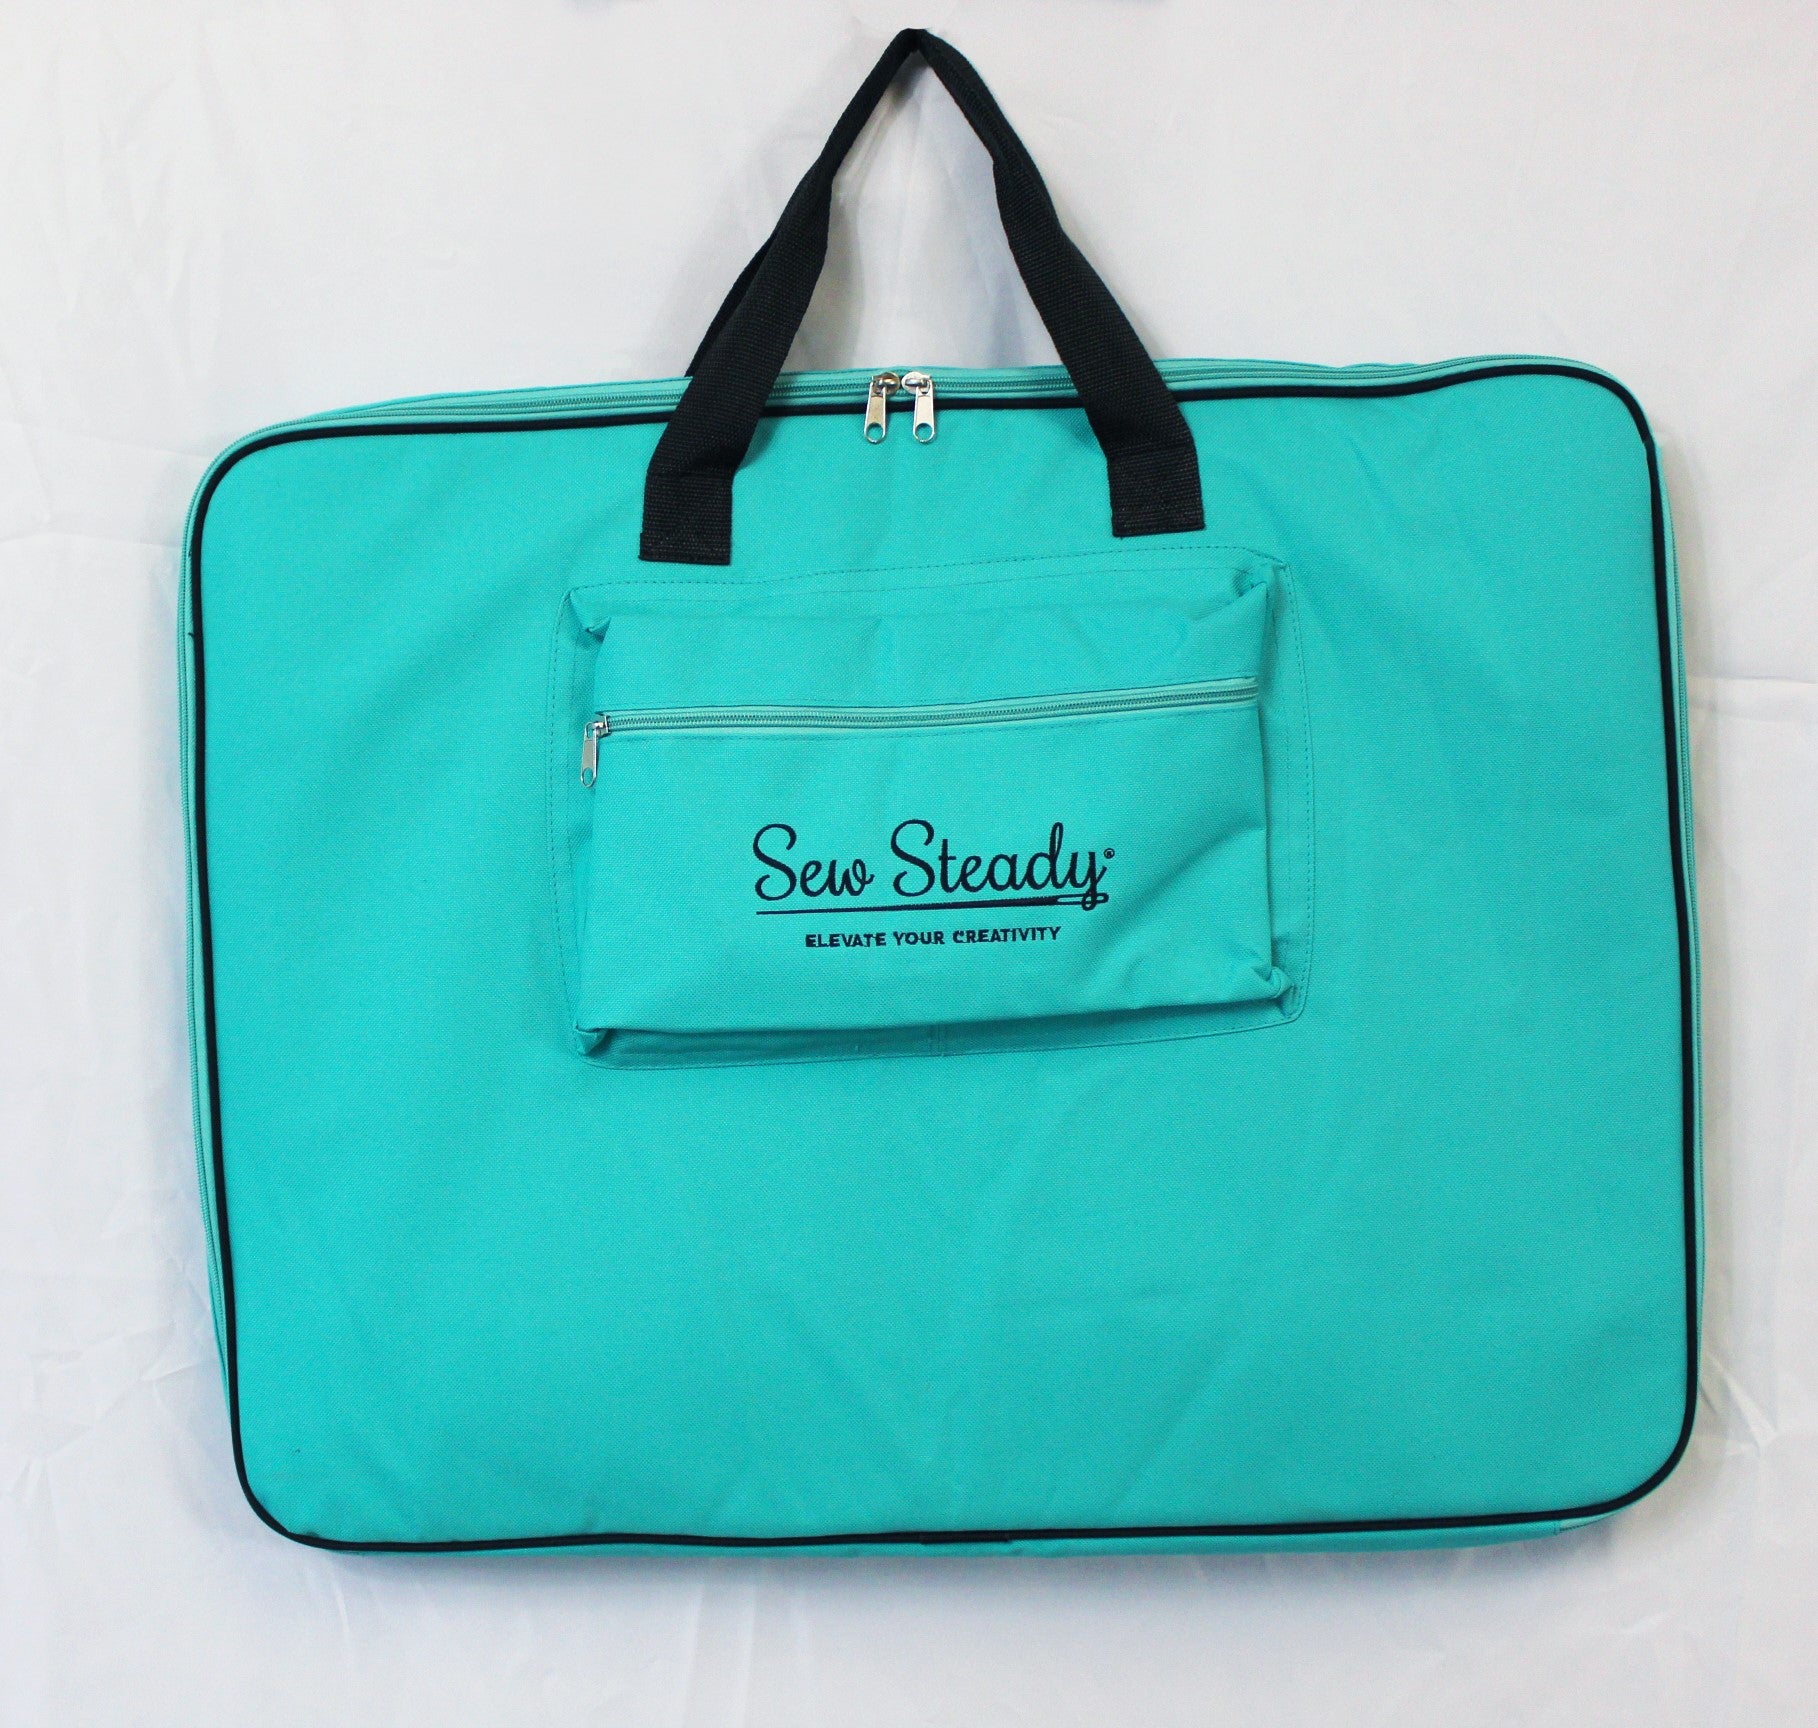 Sew Steady Large Table W 2024 Calendar & Bag - SPECIAL ORDER